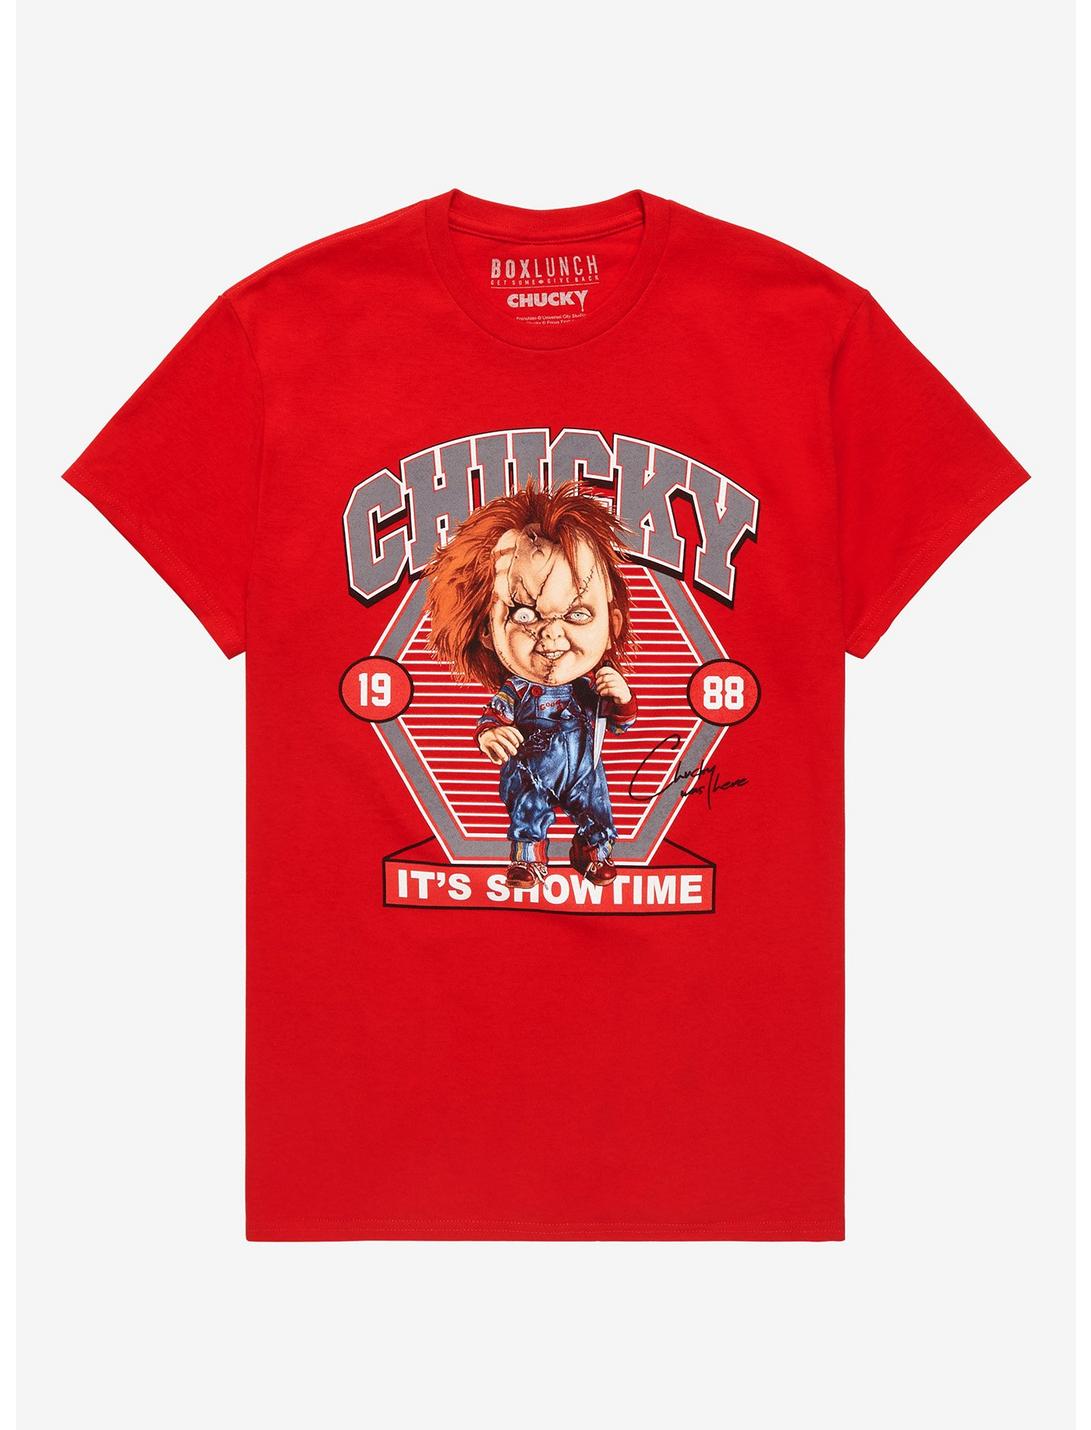 Child's Play Chucky Baseball Caricature T-Shirt - BoxLunch Exclusive, RED, hi-res